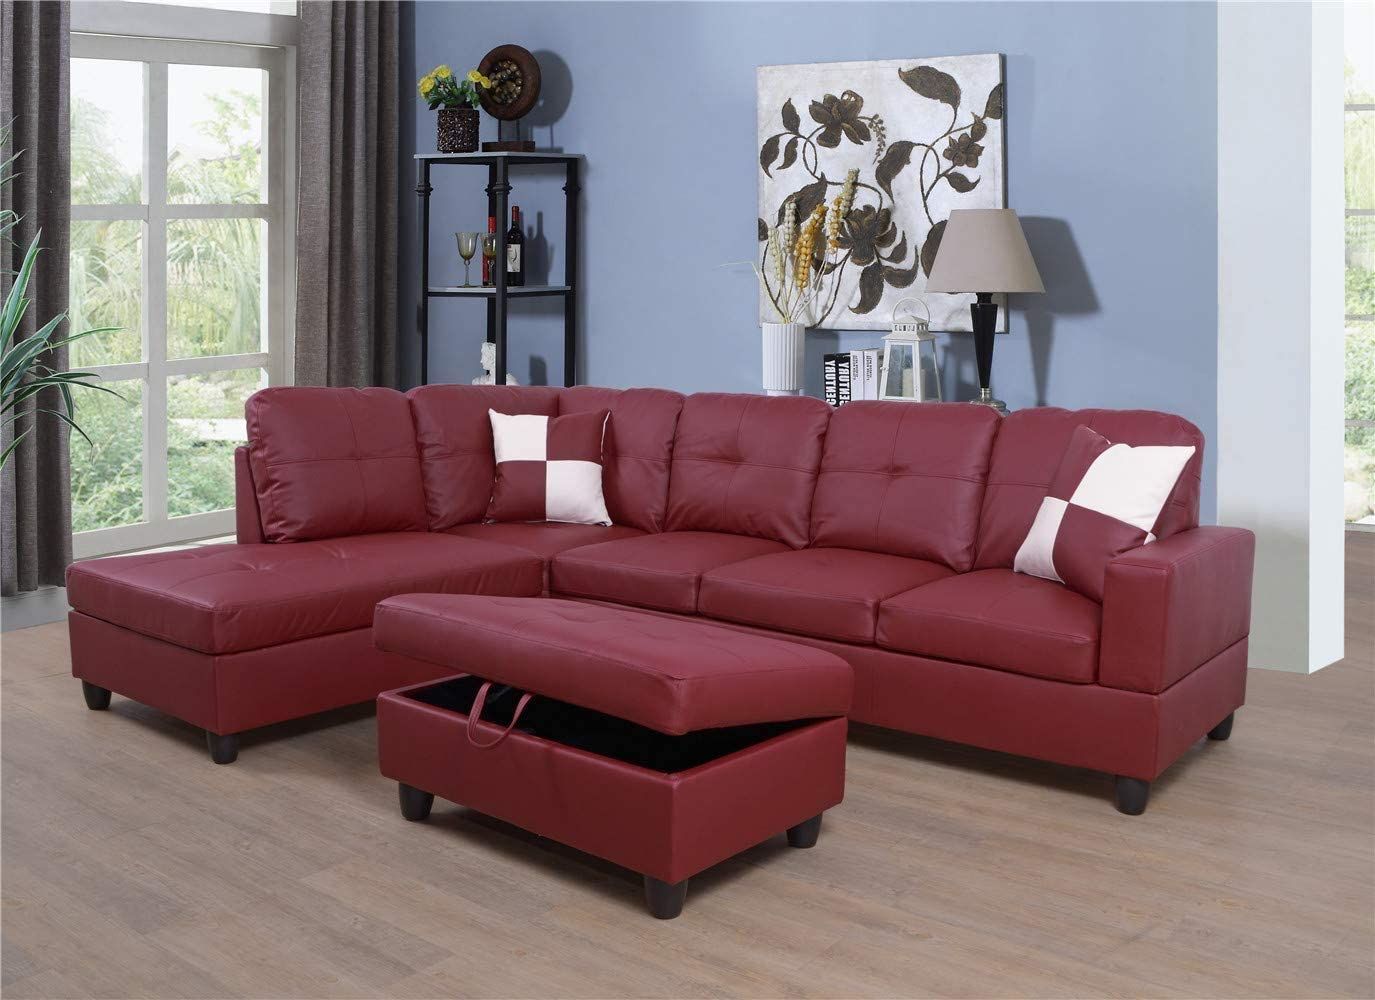 Ponliving Faux Leather 3 Piece Sectional Sofa Couch Set, L Intended For 3pc Faux Leather Sectional Sofas Brown (View 4 of 15)